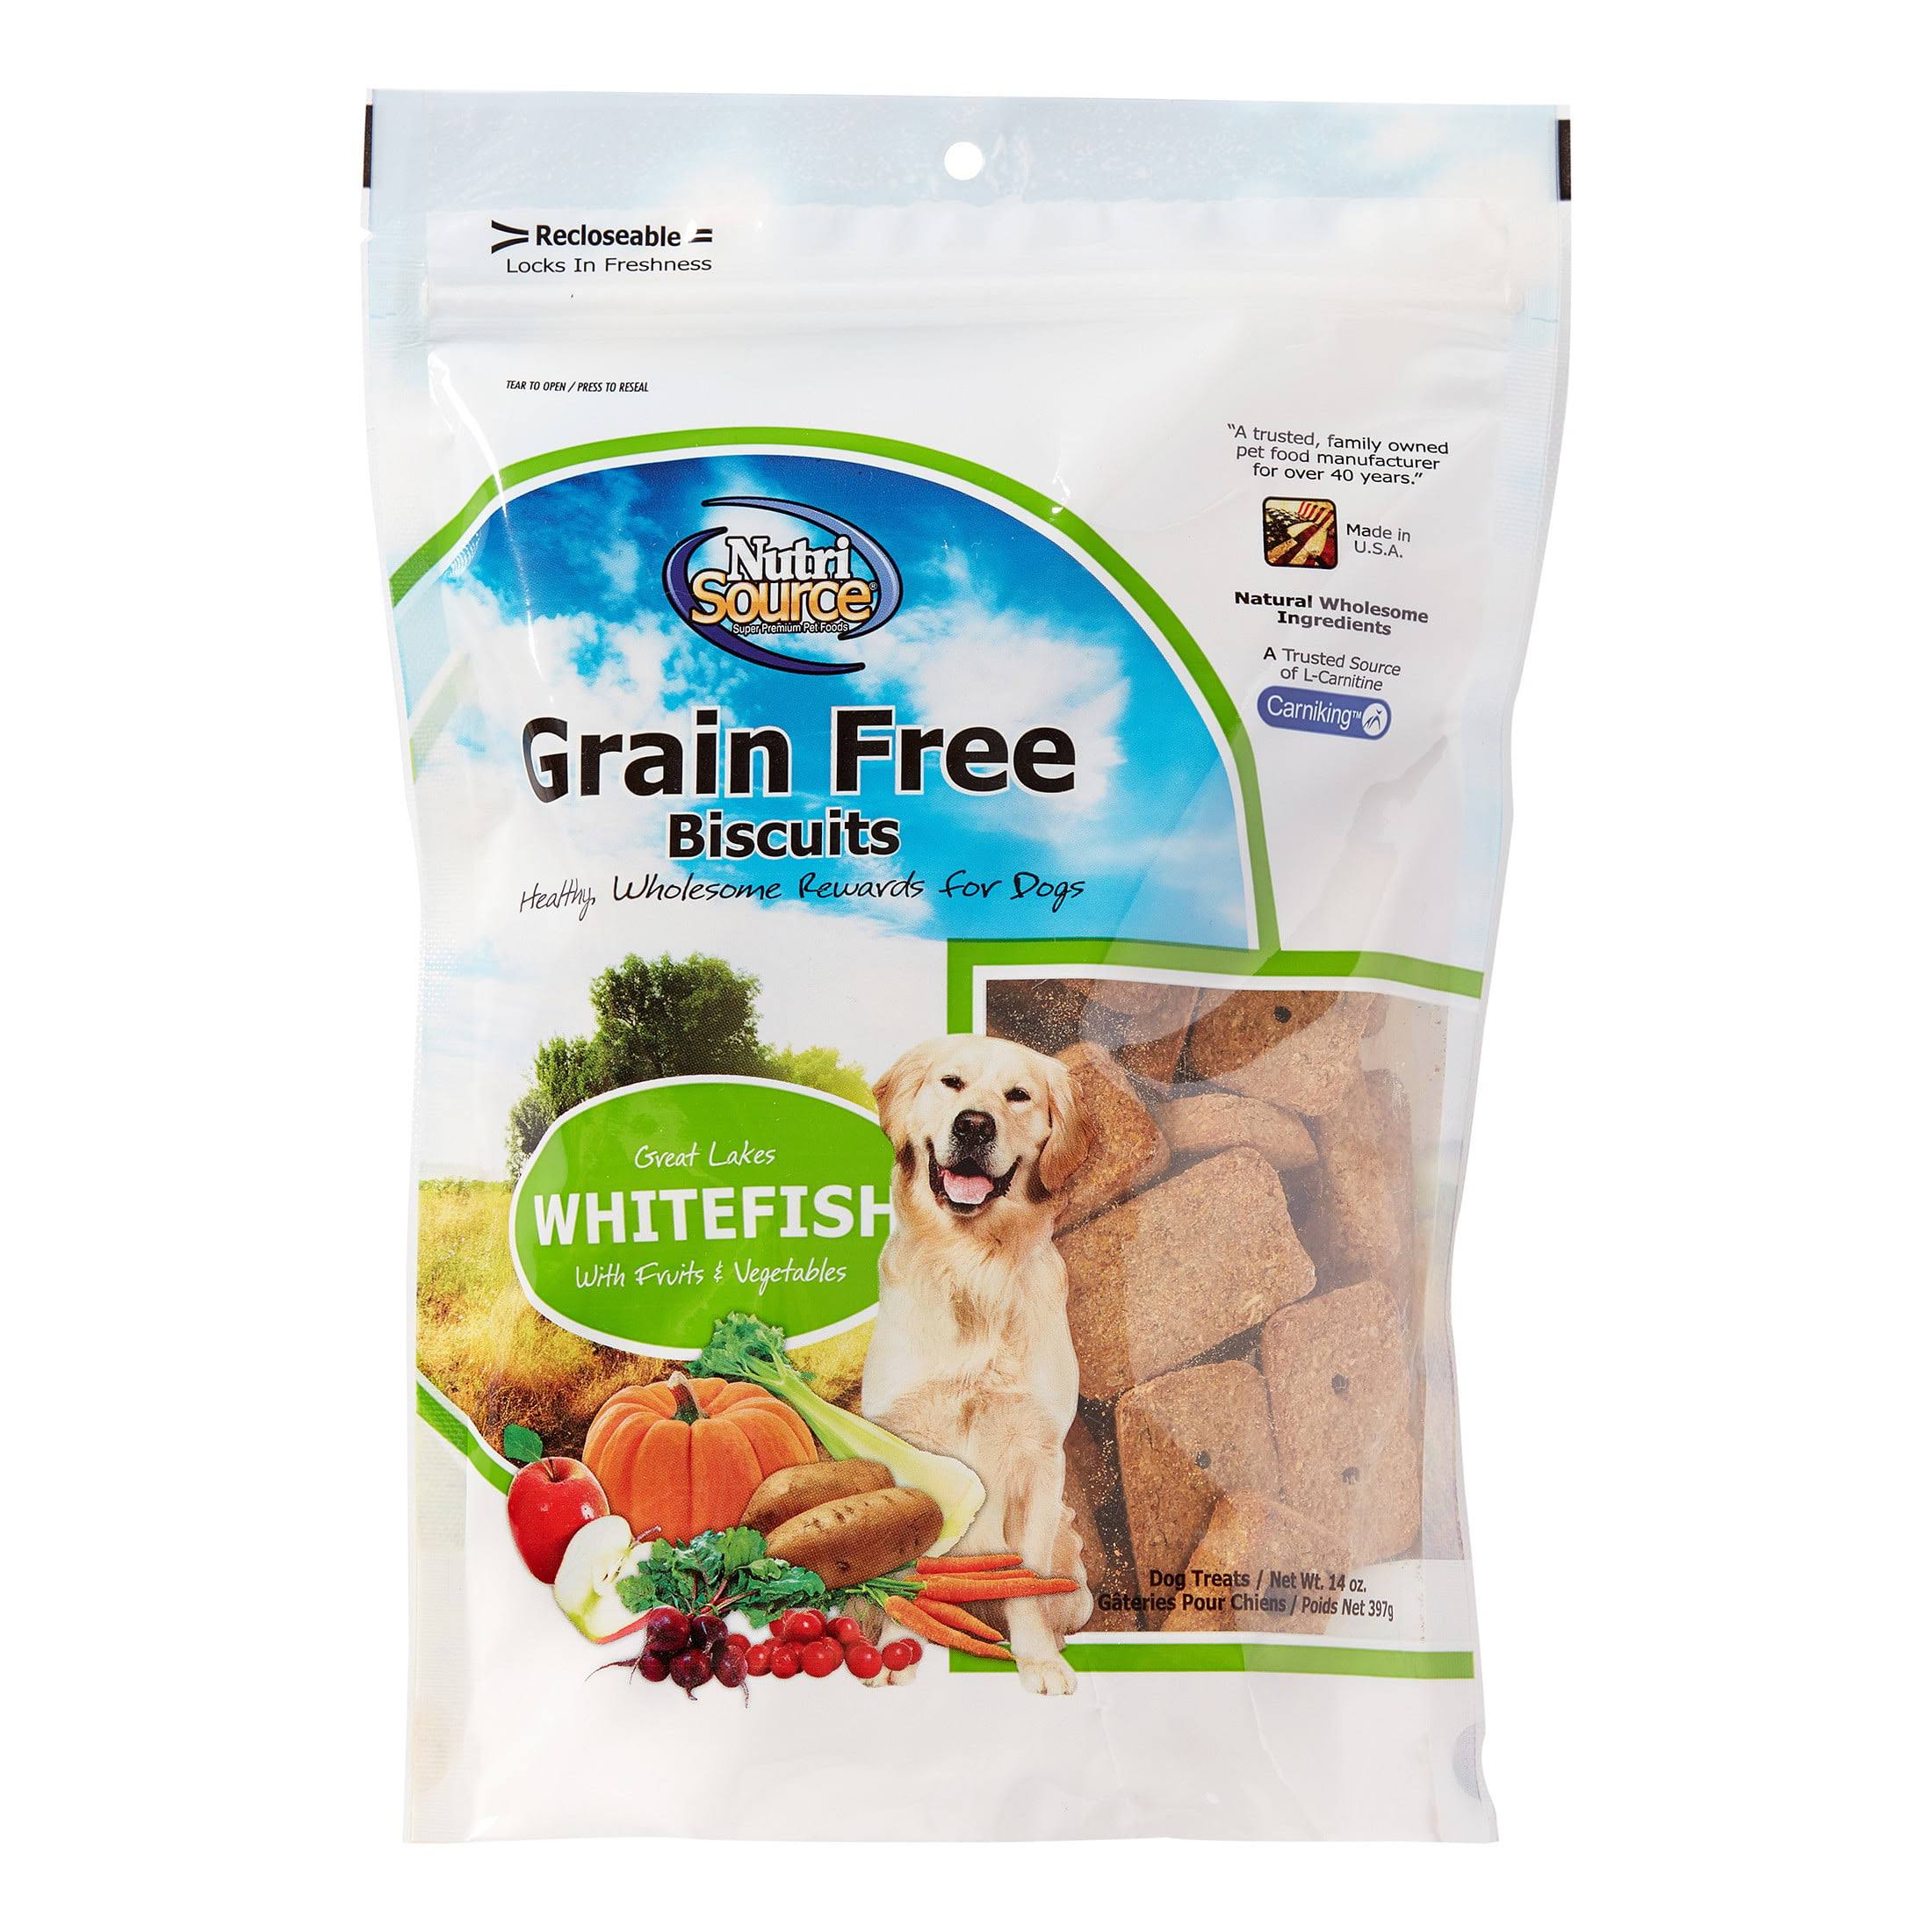 Nutri Source Grain Free Dog Biscuits - Whitefish